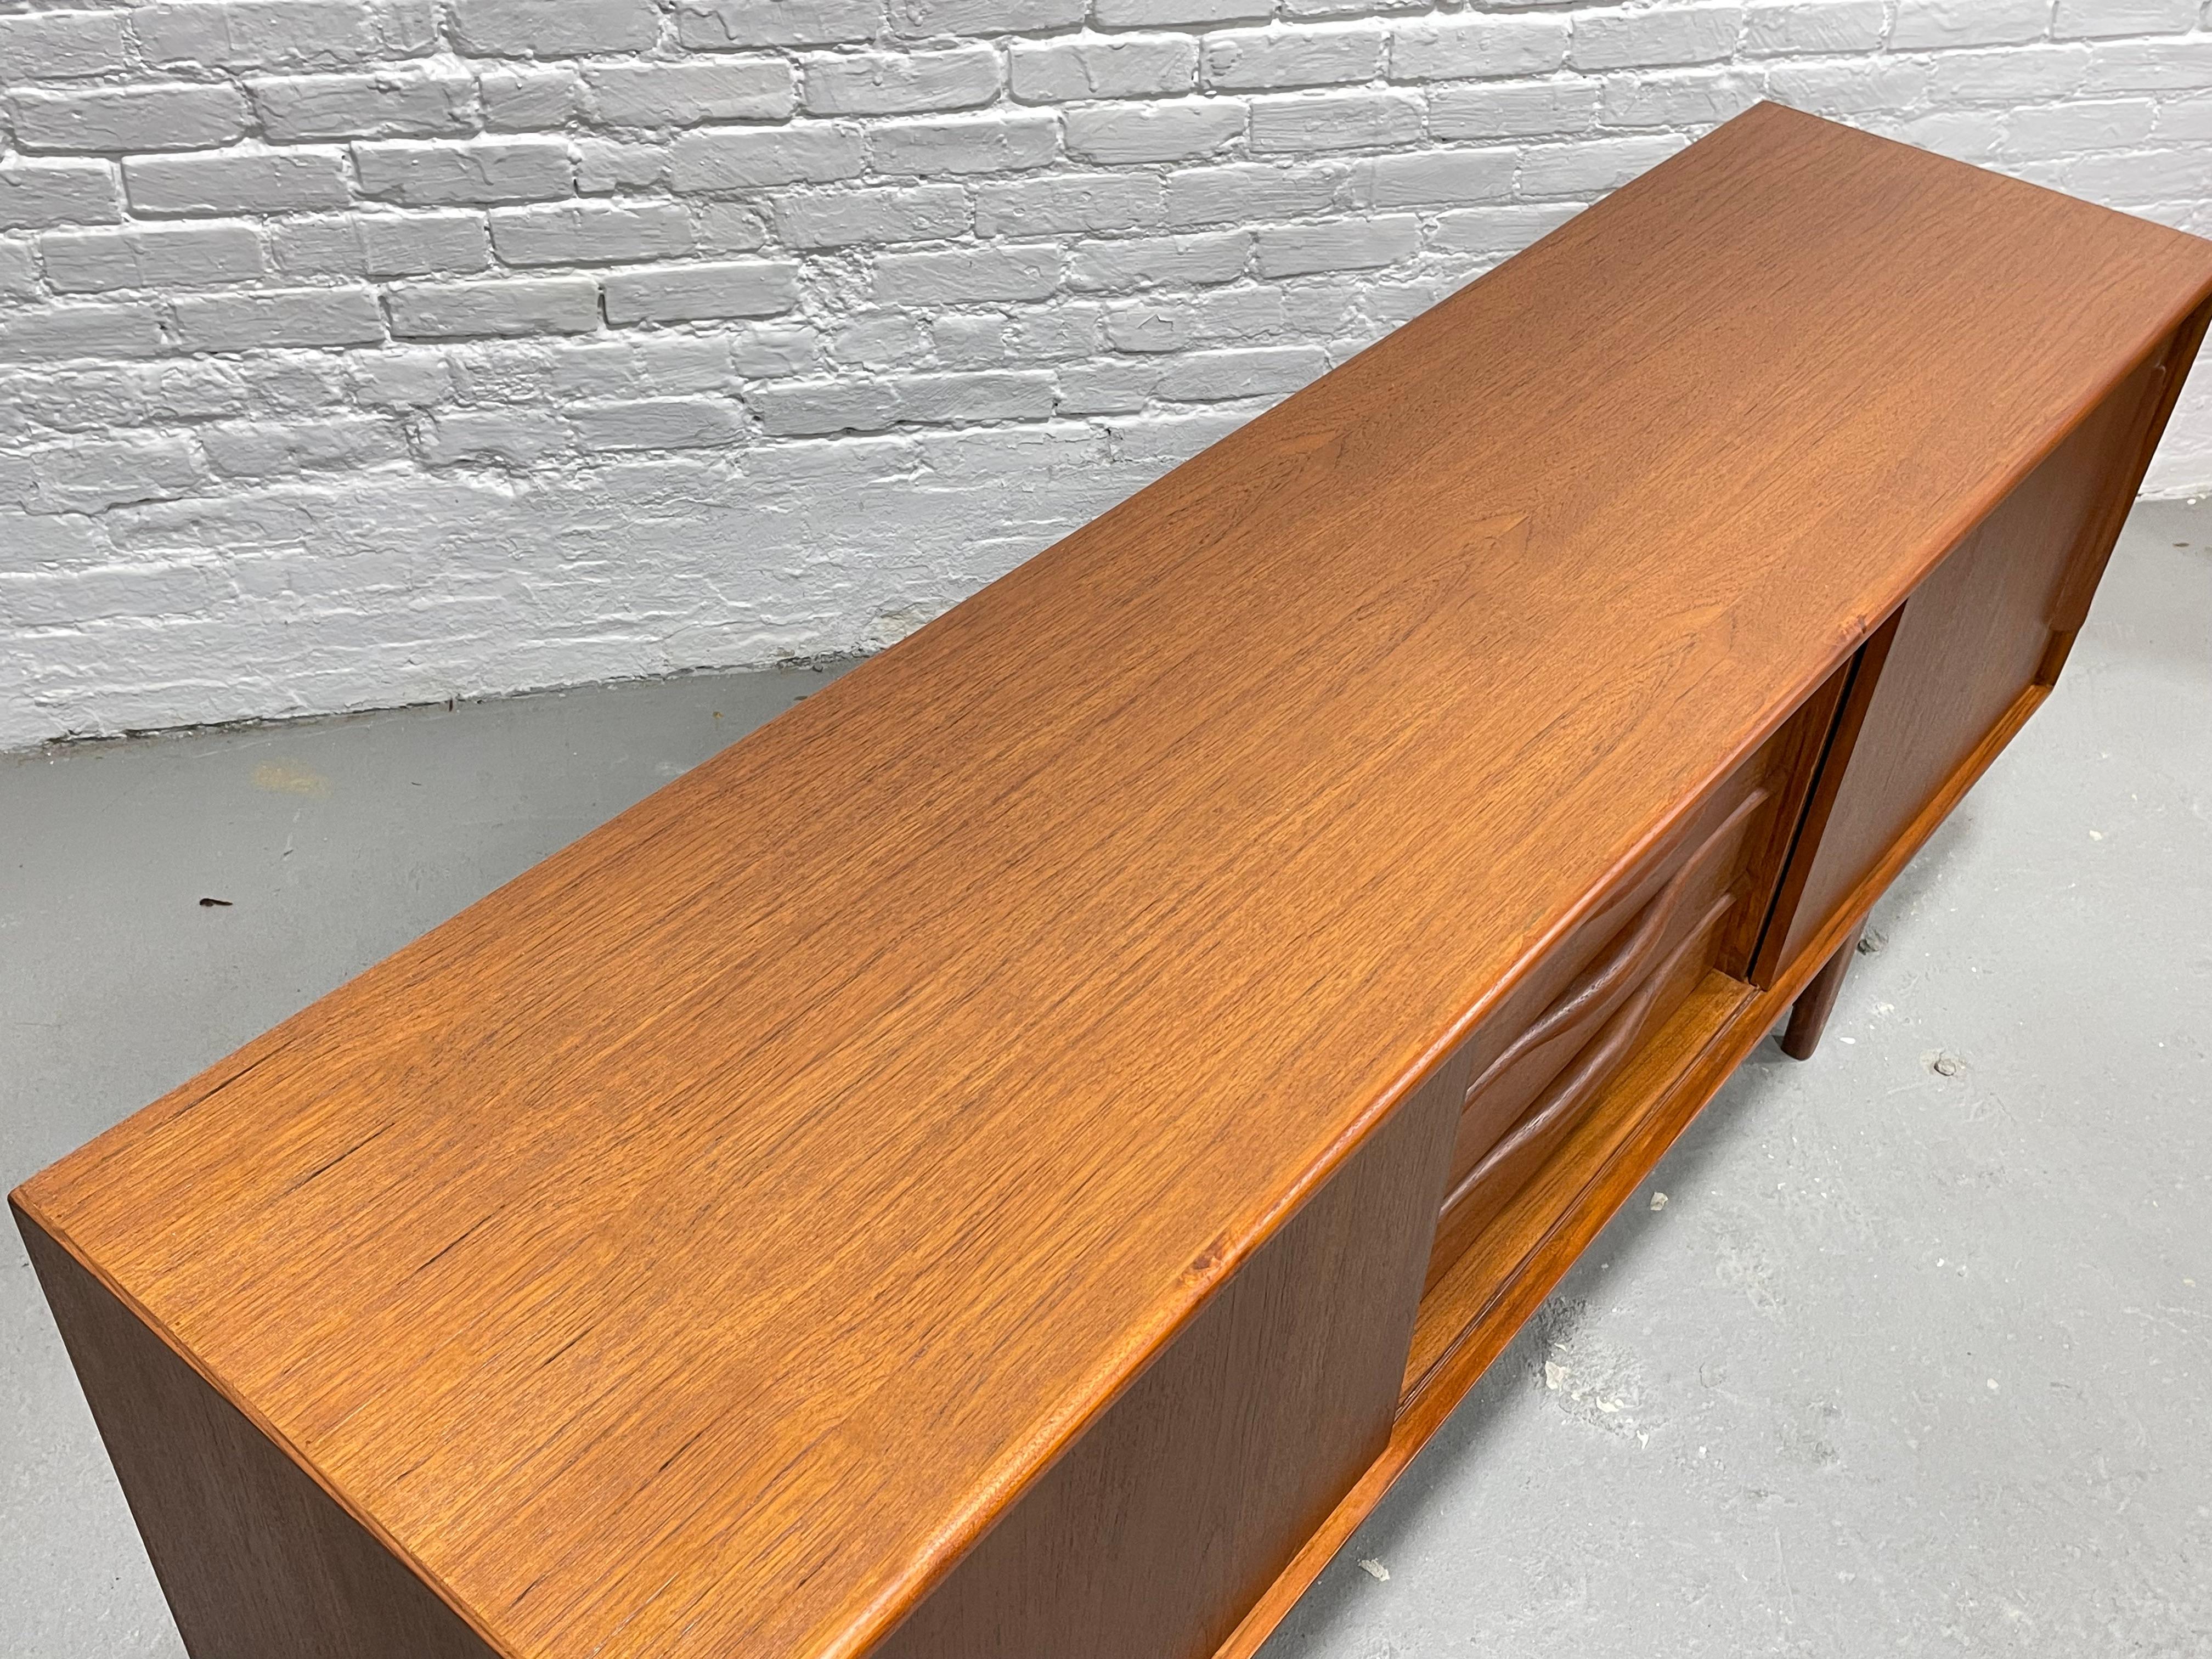 Long Sculpted Mid-Century Modern Styled Danish Teak Credenza For Sale 8